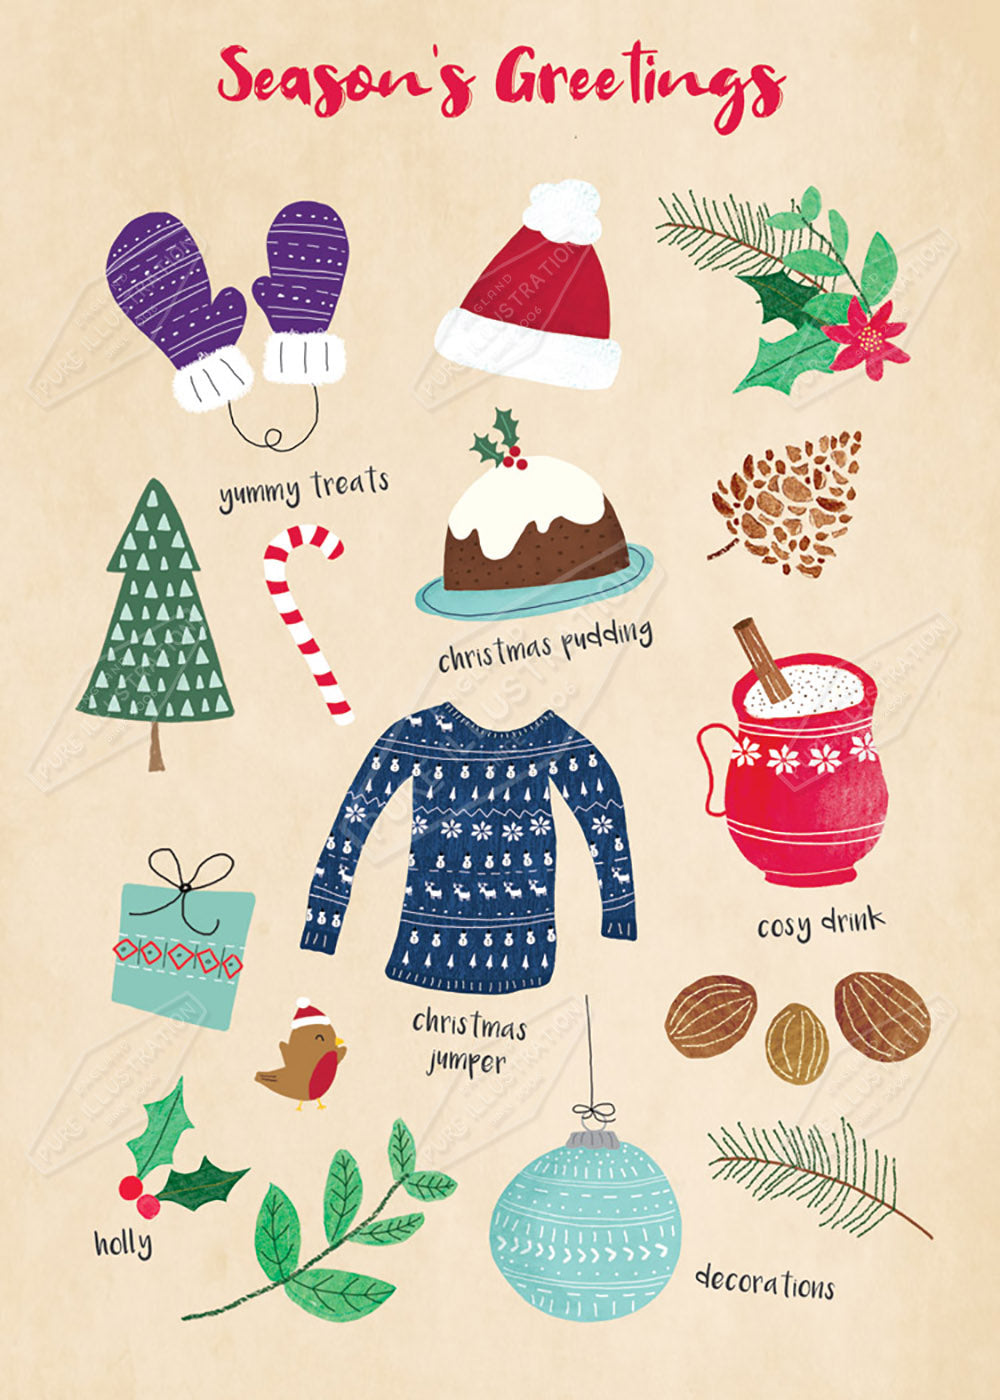 Seasons Greetings Icons Illustration by Cory Reid for Pure Art Licensing Agency & Surface Design Studio